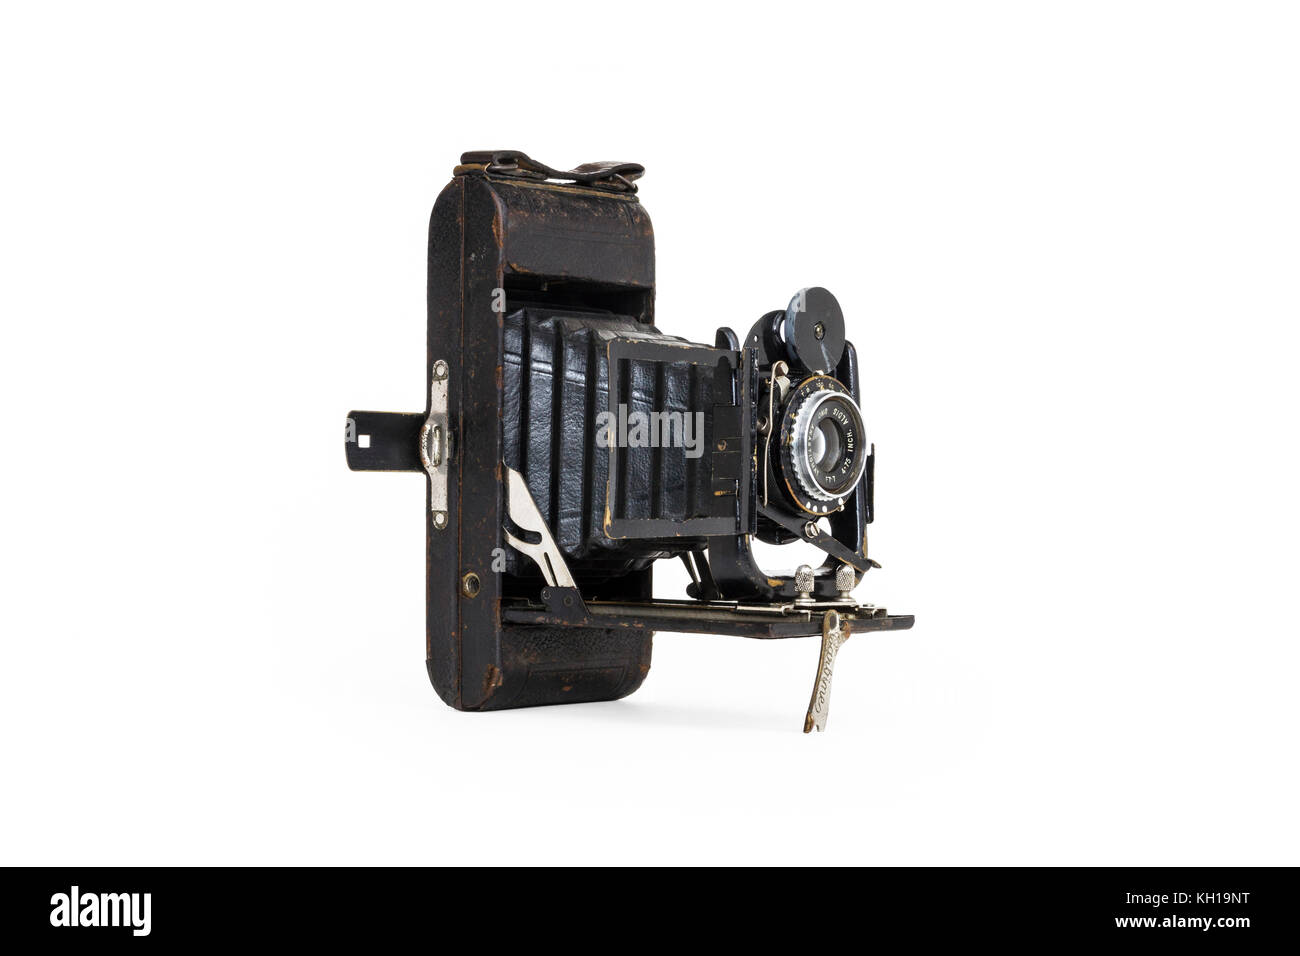 Early 20th Century Butchers Watch Pocket Carbine 120 roll film camera, 1910-1920, isolated against a white background Stock Photo